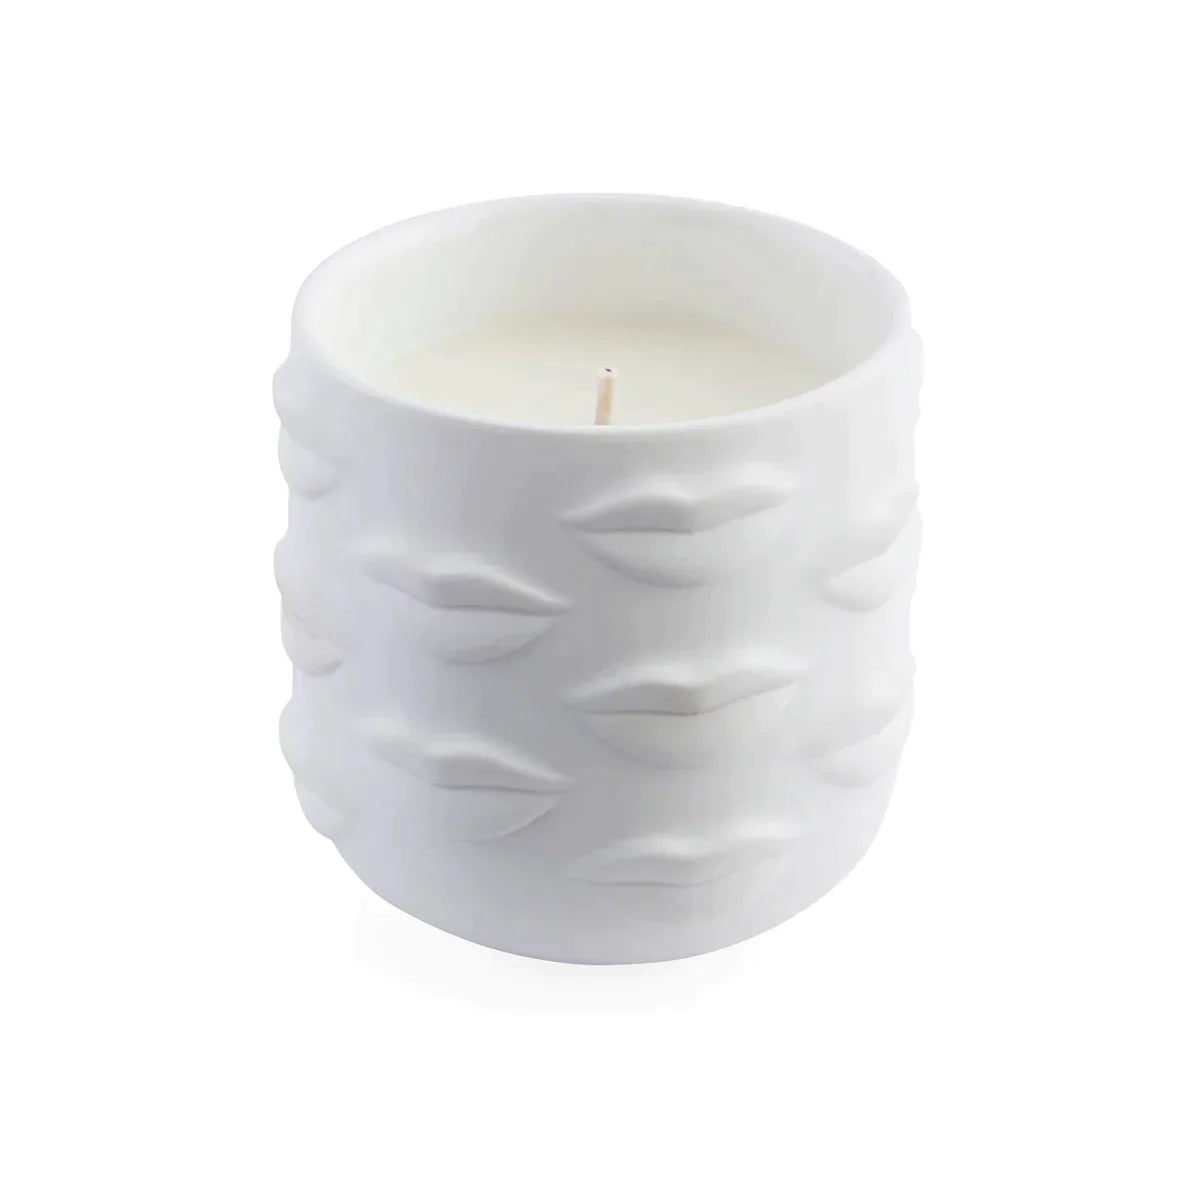 muse bouche ceramic candle